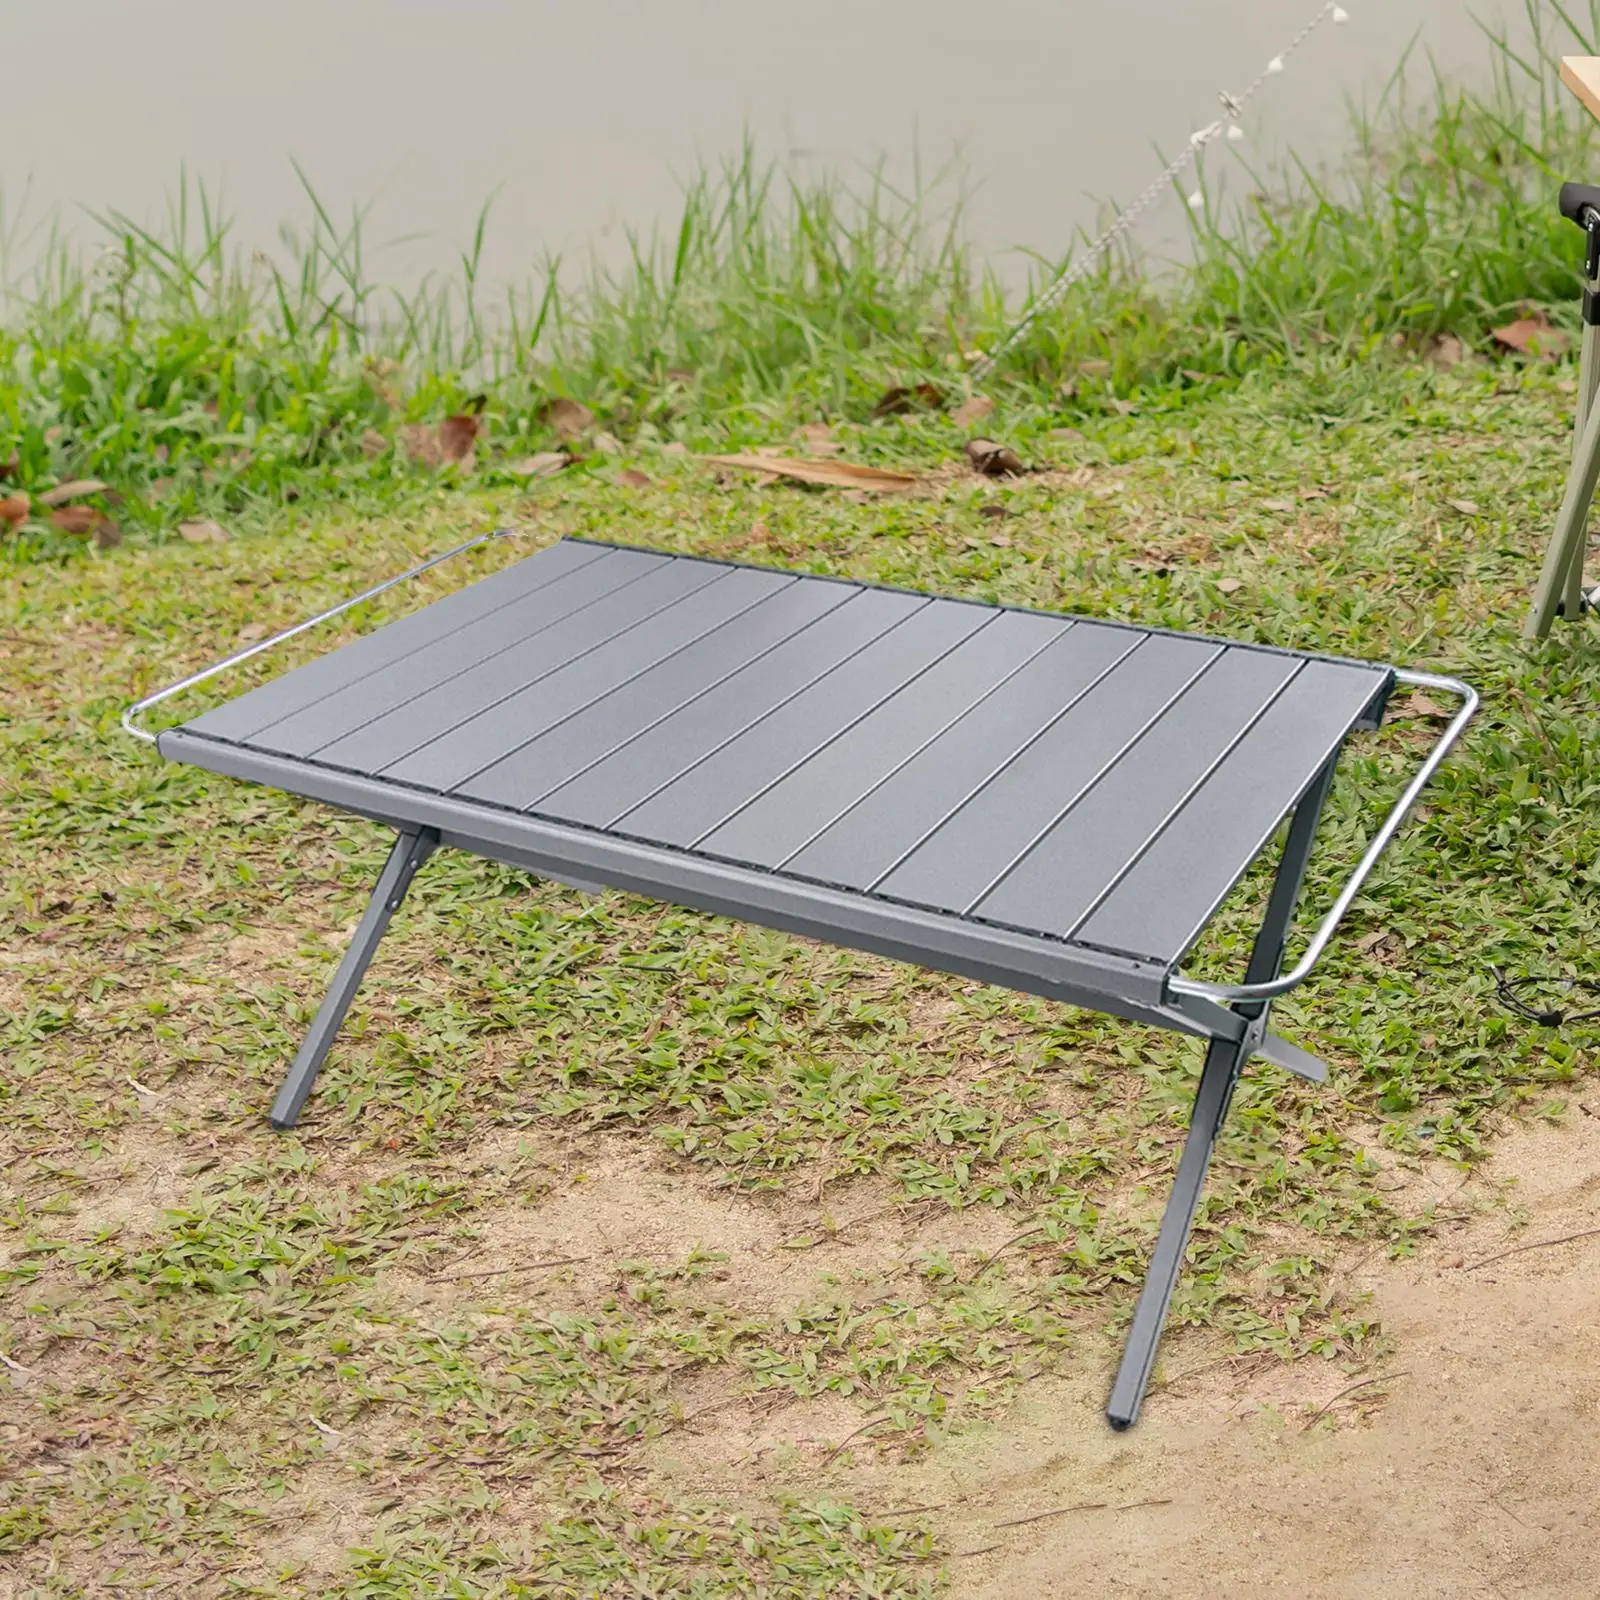 Camping Table Roll up Aluminum Alloy with Carry Bag for Party Picnic Outdoor